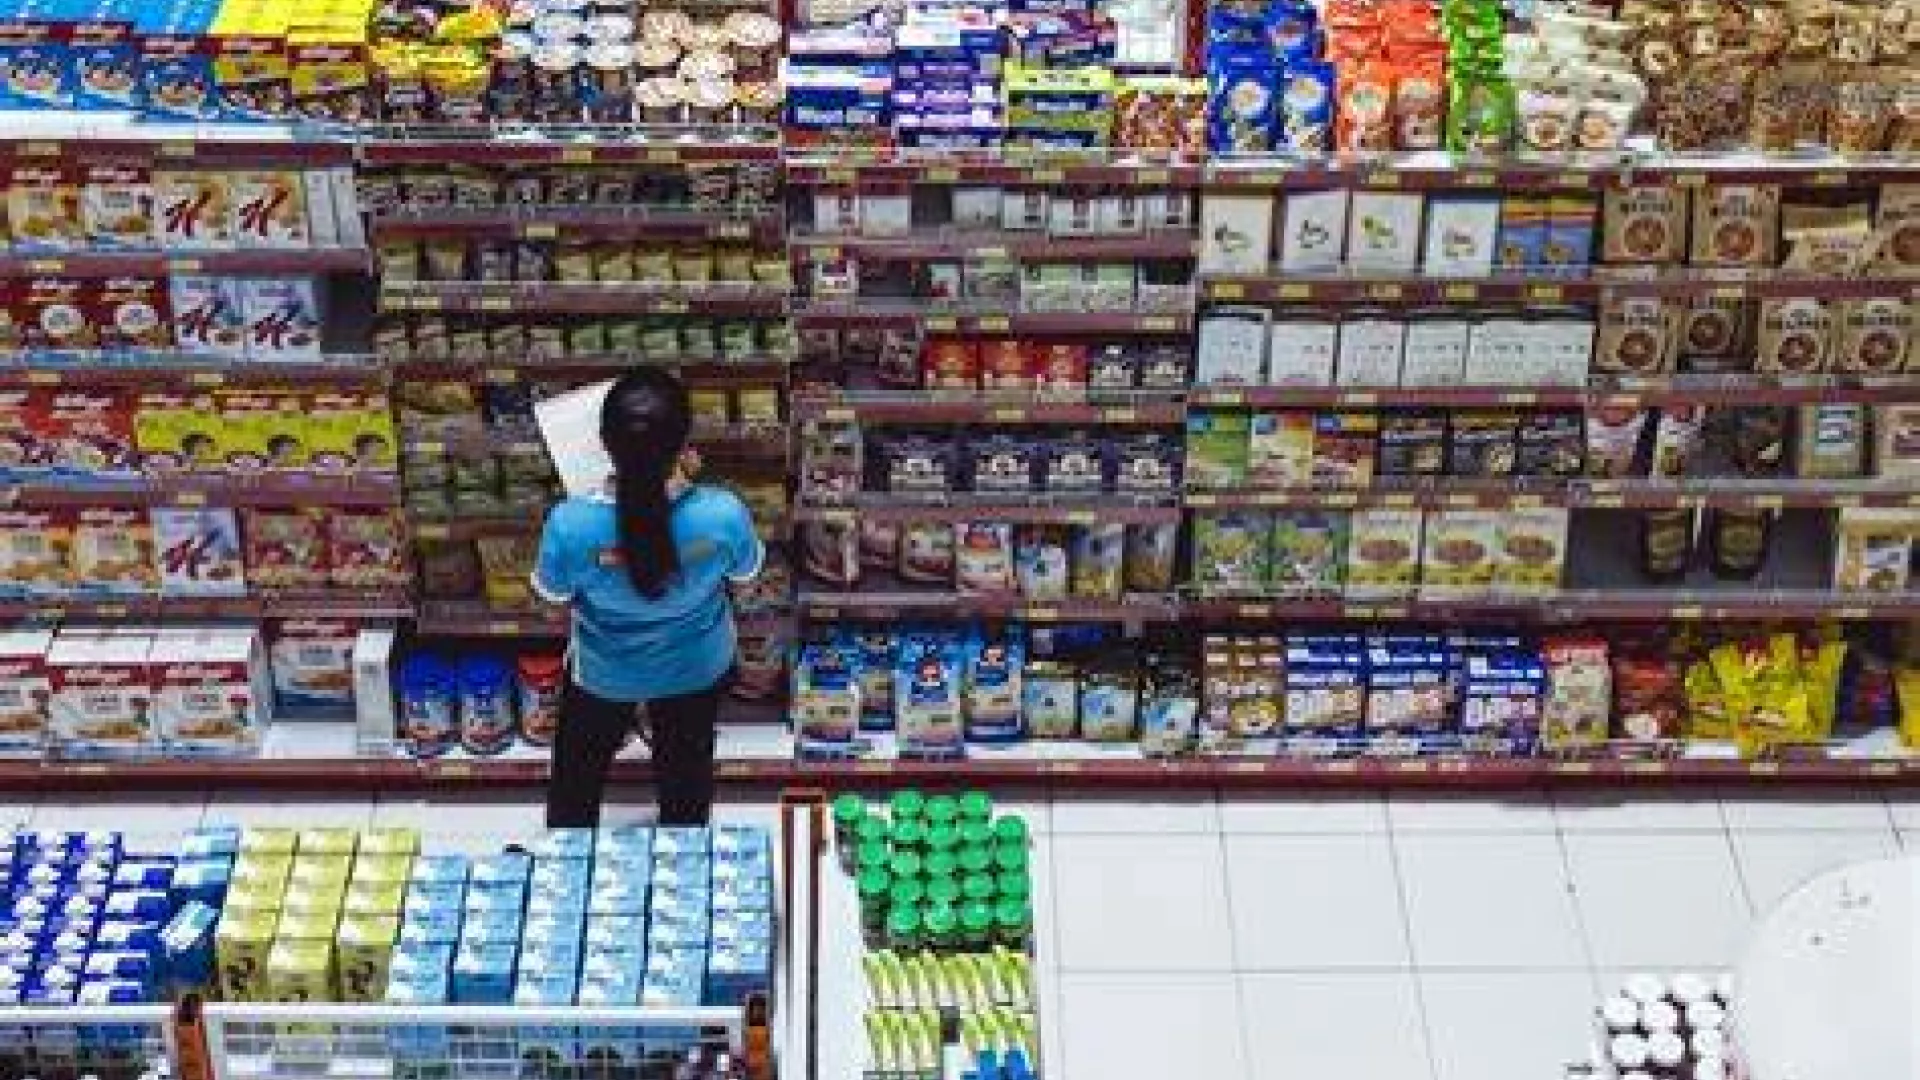 A photo of a person standing in front of store shelves in a supermarket.